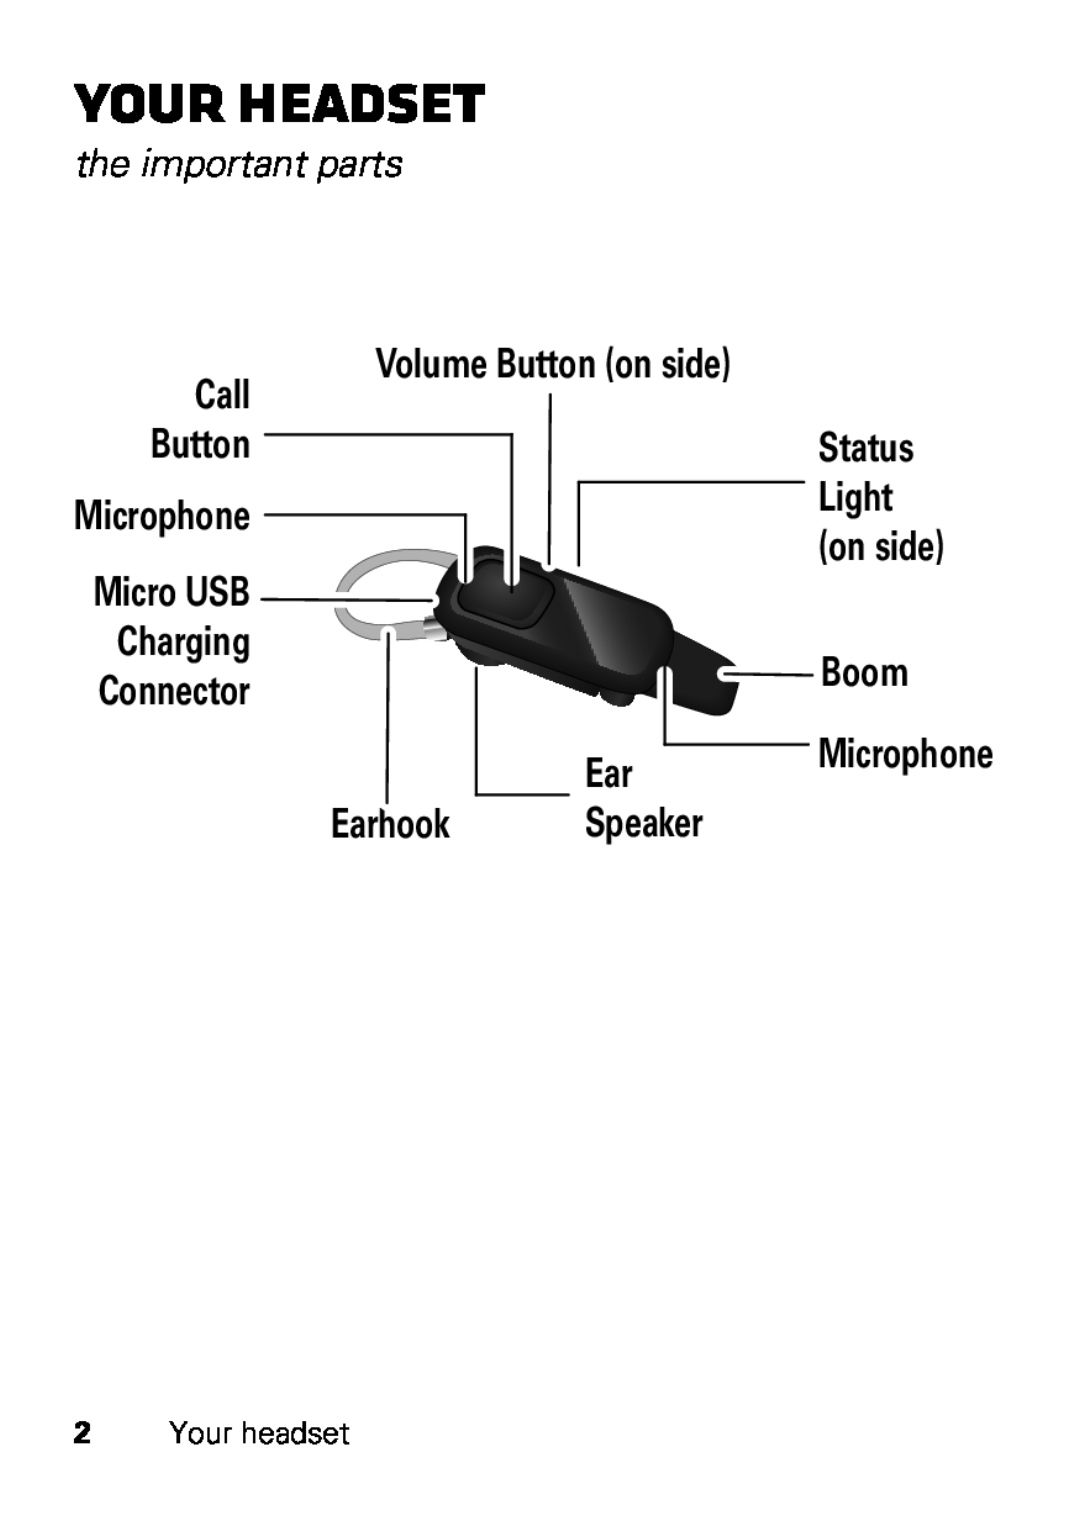 Motorola HX550 Your headset, the important parts, Charging, Volume Button on side, Microphone, Micro USB, Connector 